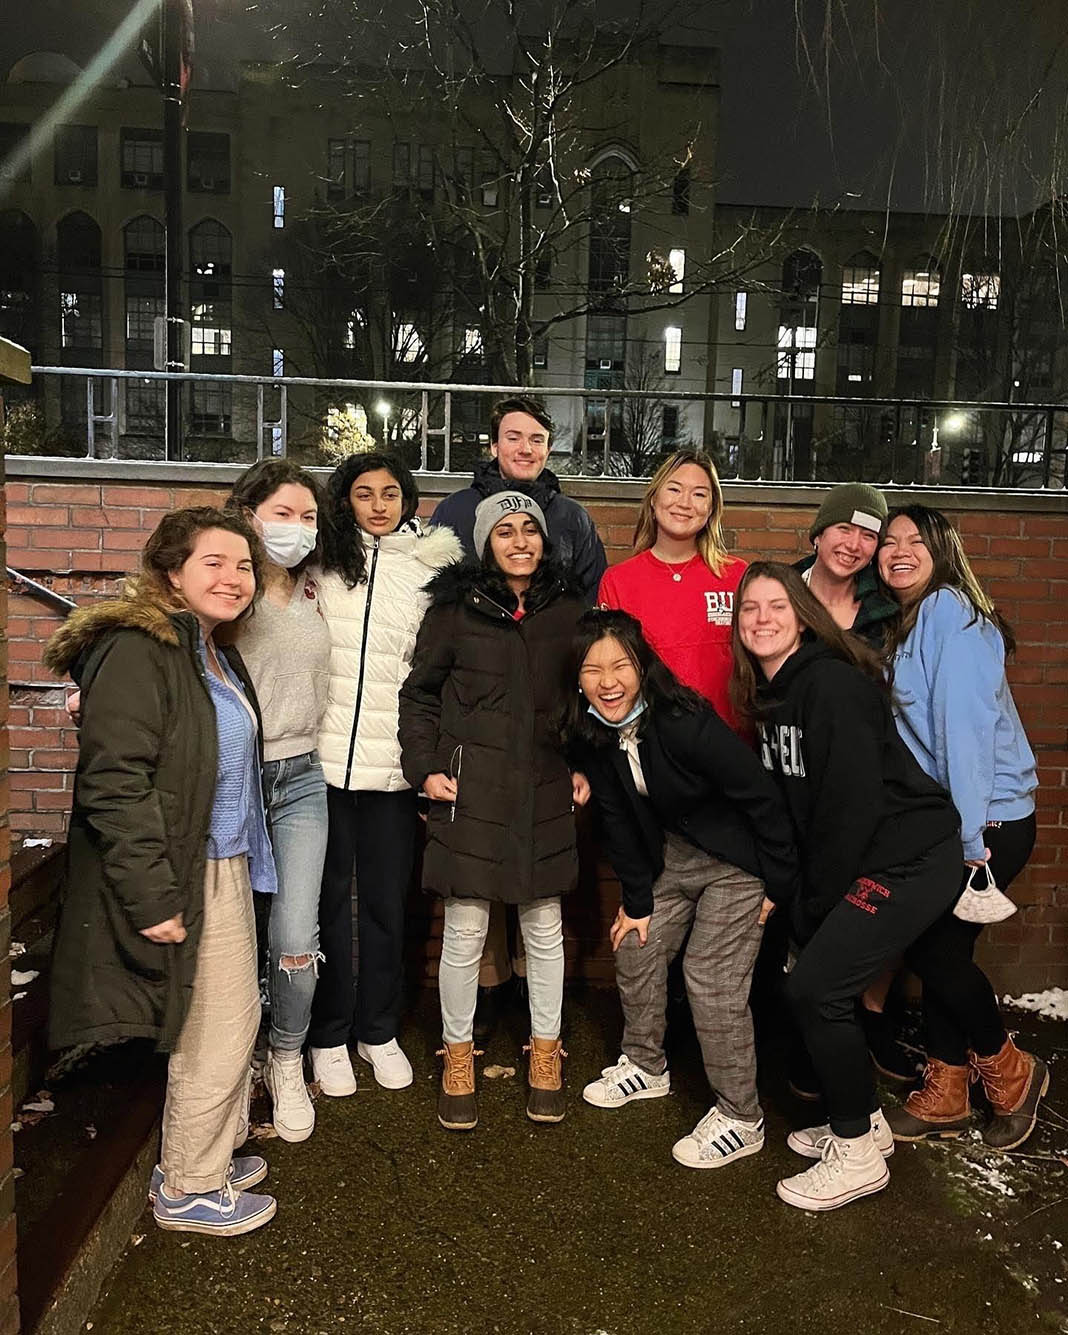 Photo: Madhri Yehiya and her fellow Fall 2021 Daily Free Press E-board pose in the cold Boston winter setting for a photo together.